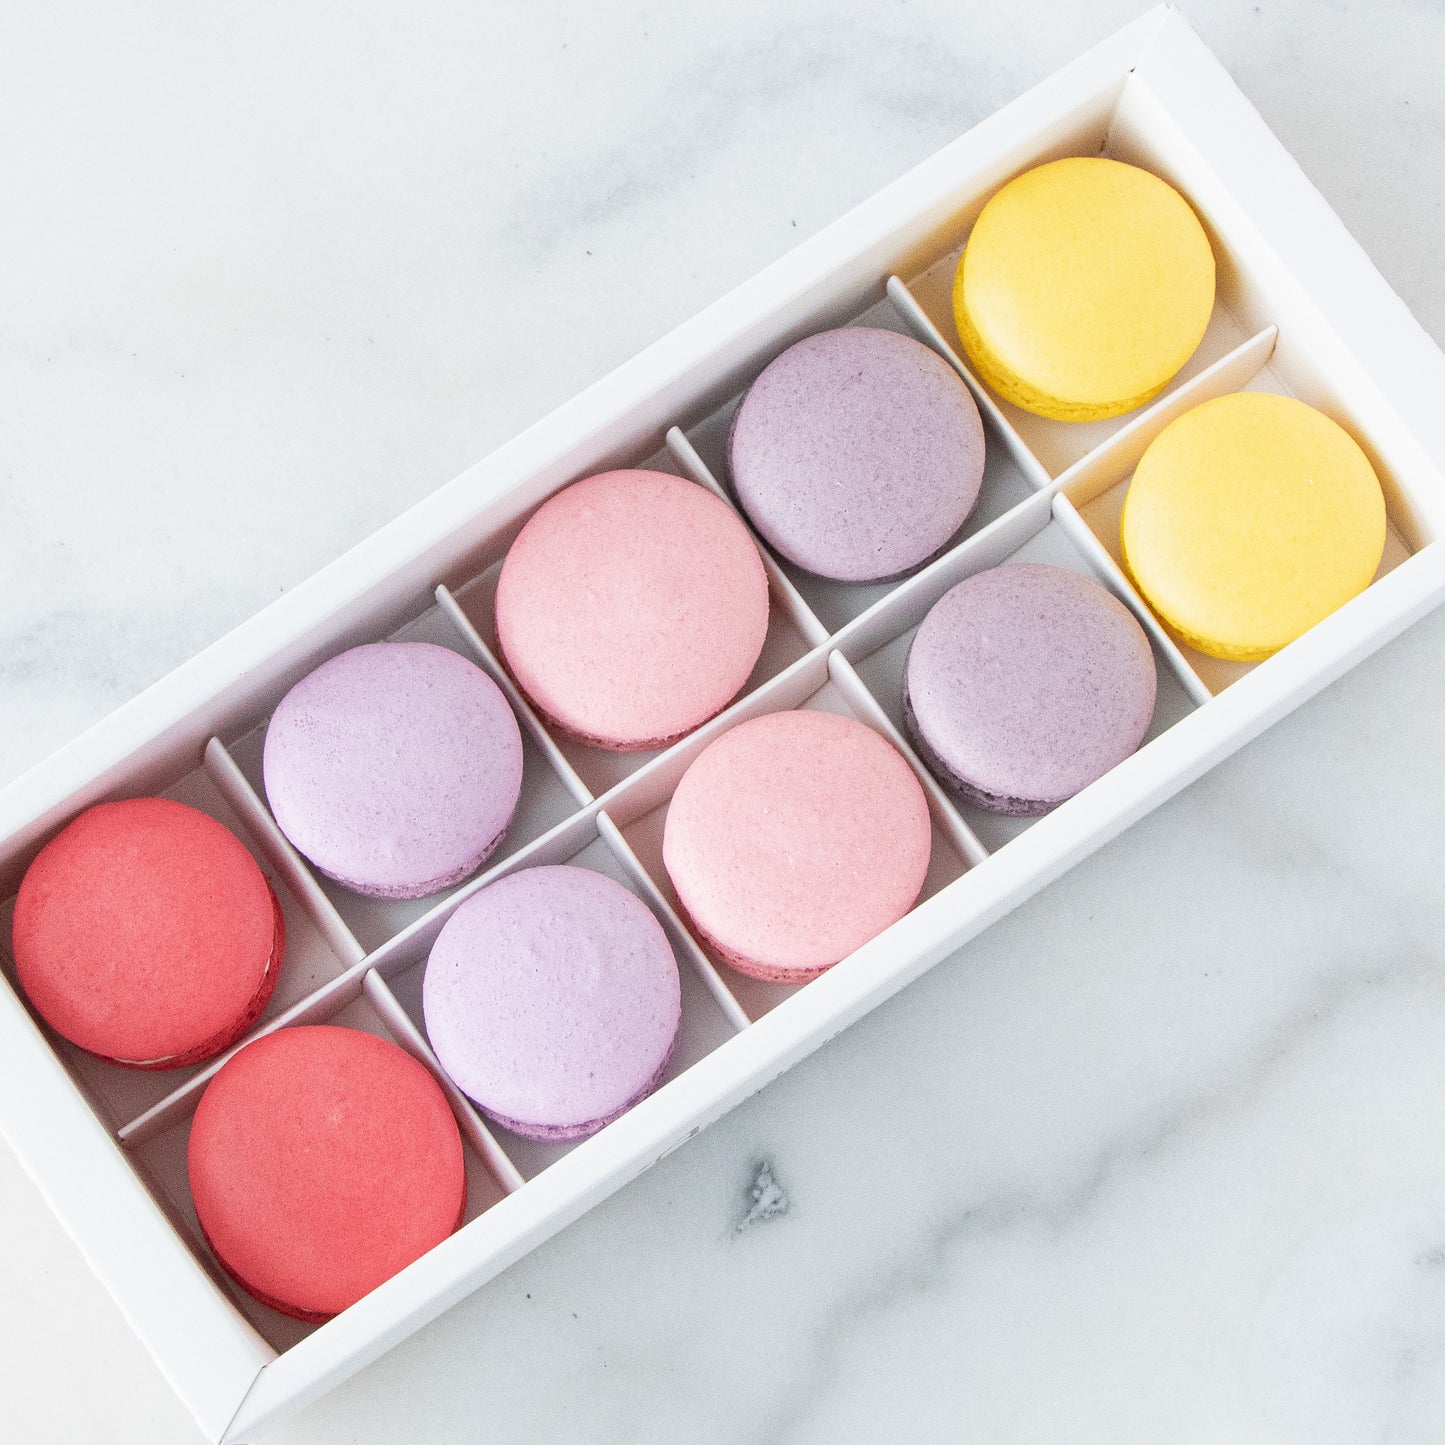 10pcs Classic Macarons (Classic2) in Gift Box and Paper Bag | Perfect Gift Choice